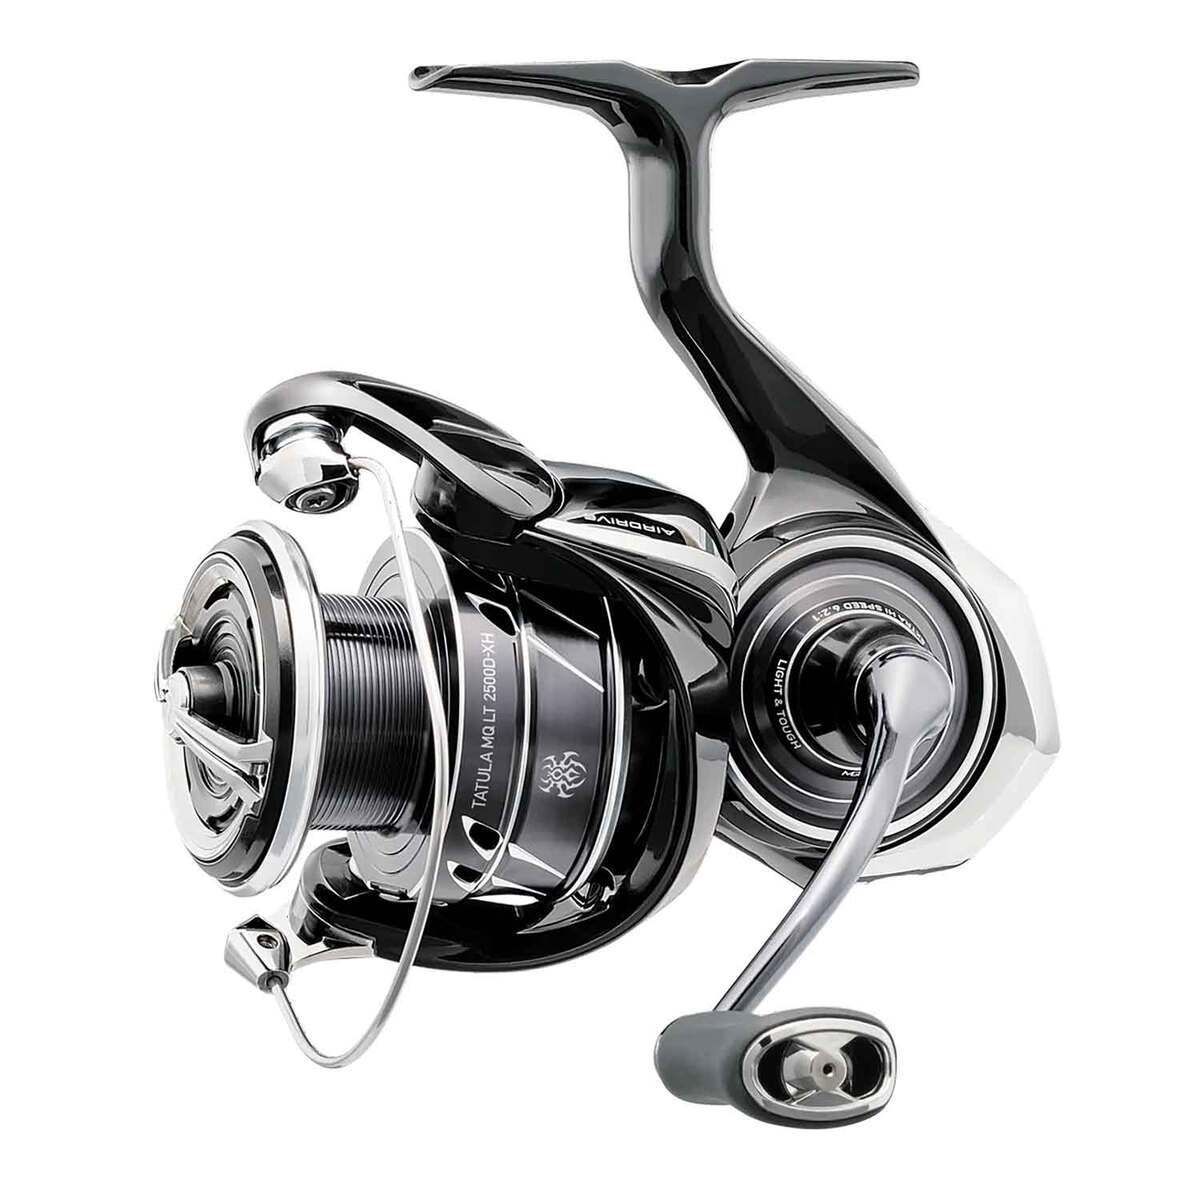 Clearance sale Daiwa 21 Certate SW 10000-P Spinning Reel, Perfect Gifts